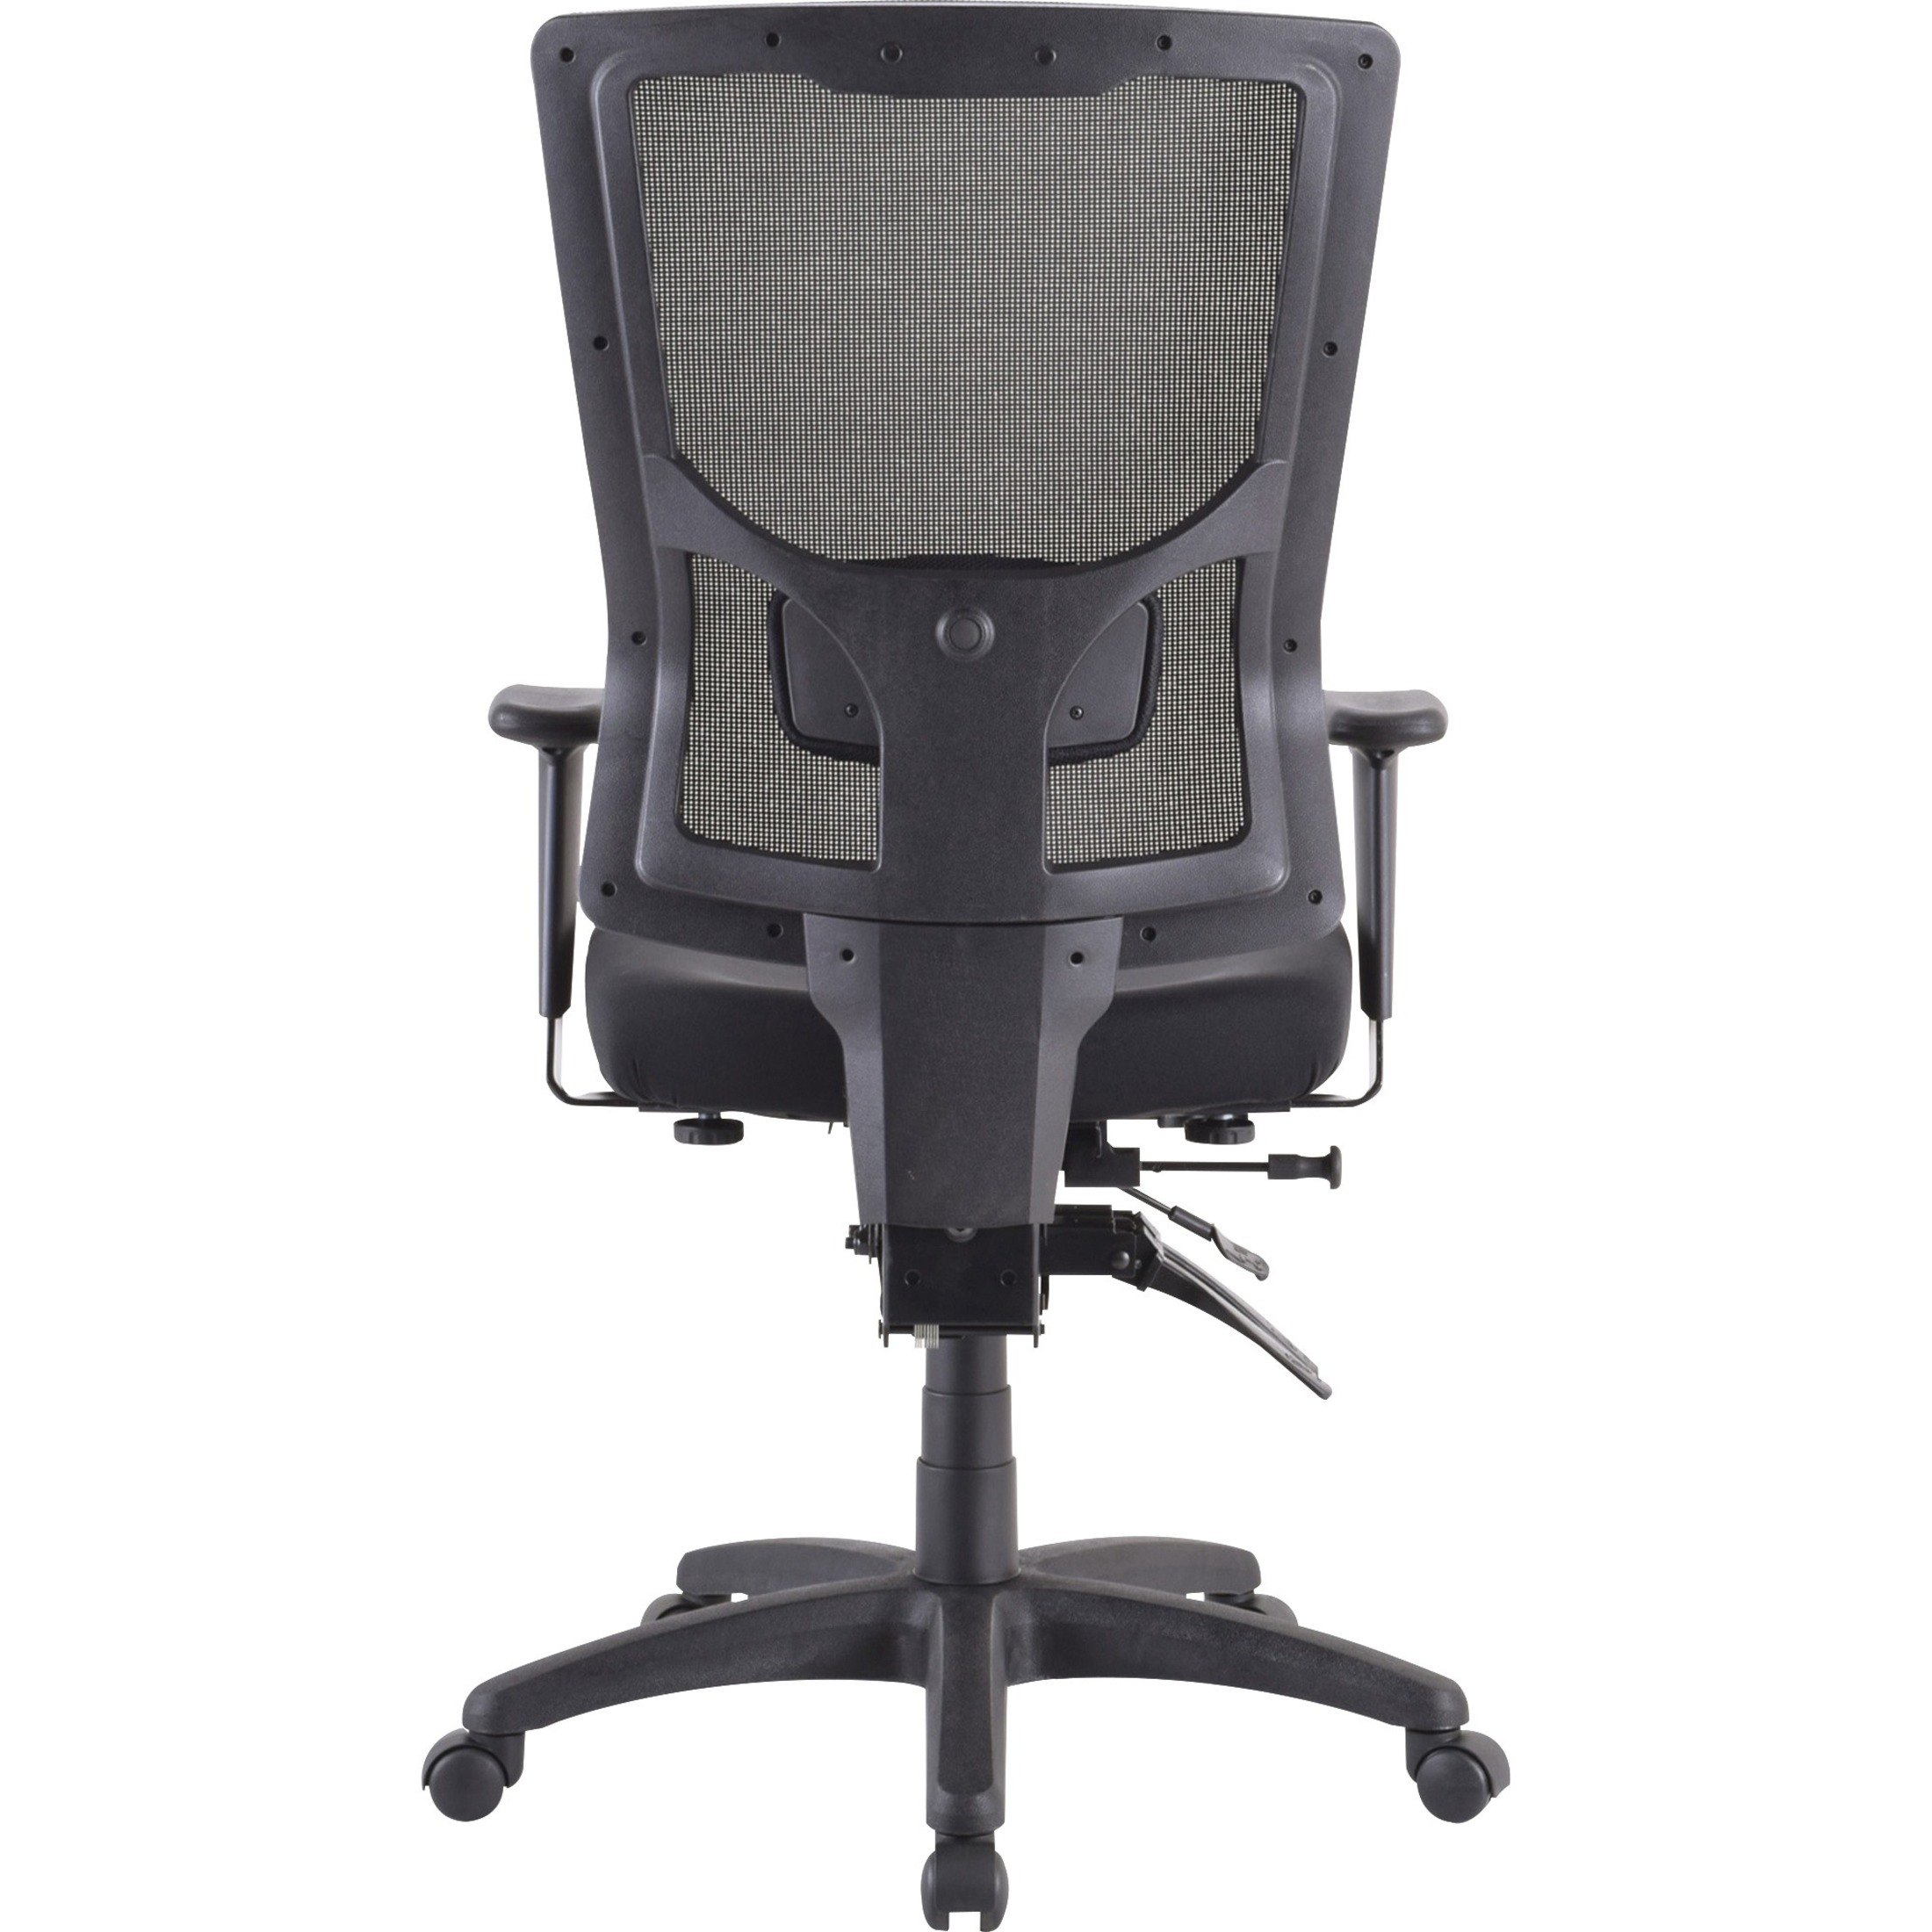 Lorell Conjure Executive High-back Mesh Back Chair - image 2 of 6